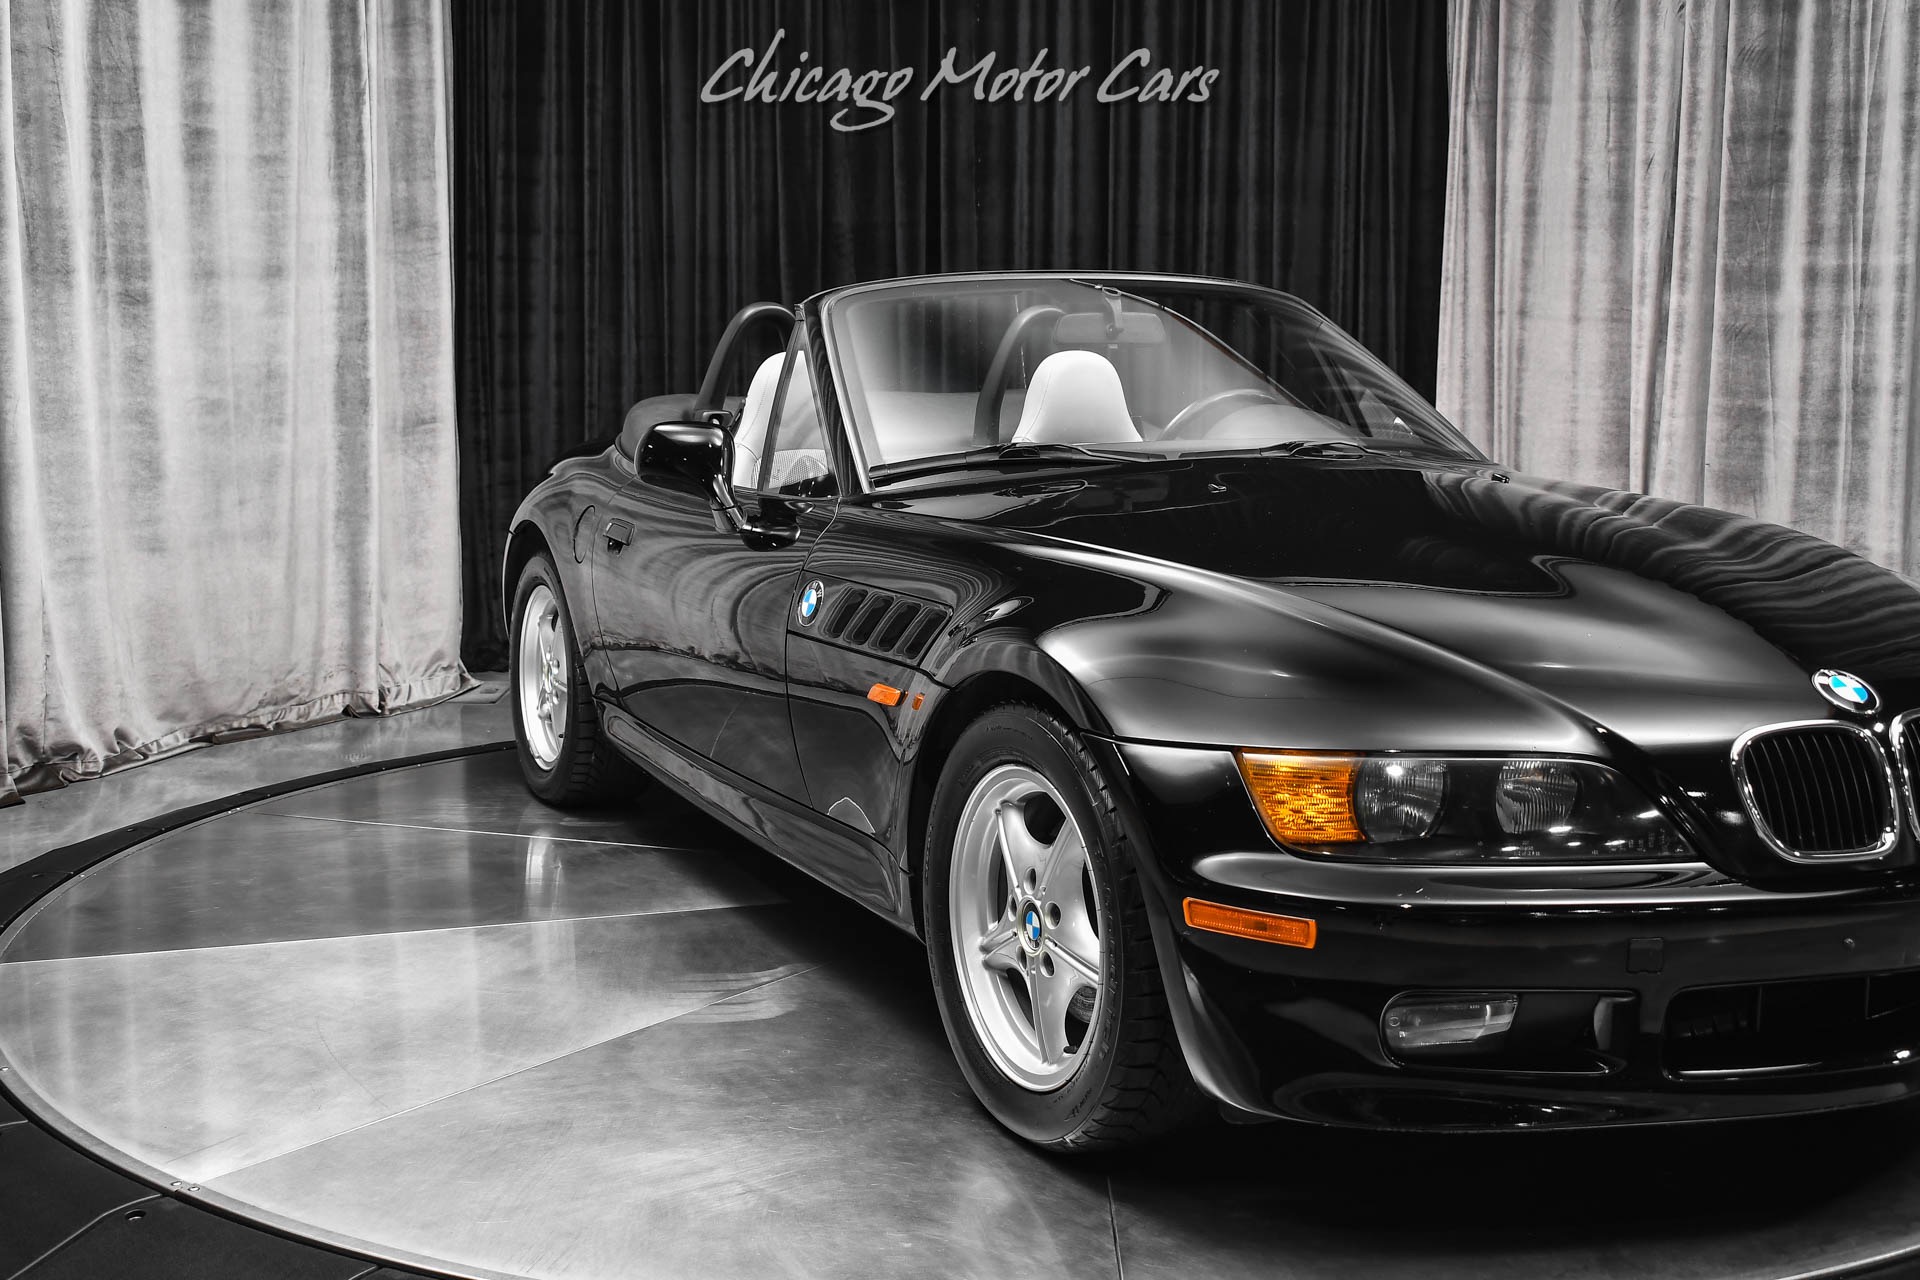 Used-1998-BMW-Z3-Roadster-Convertible-5-Speed-Manual-Heated-Seats-Original-MSRP-29K